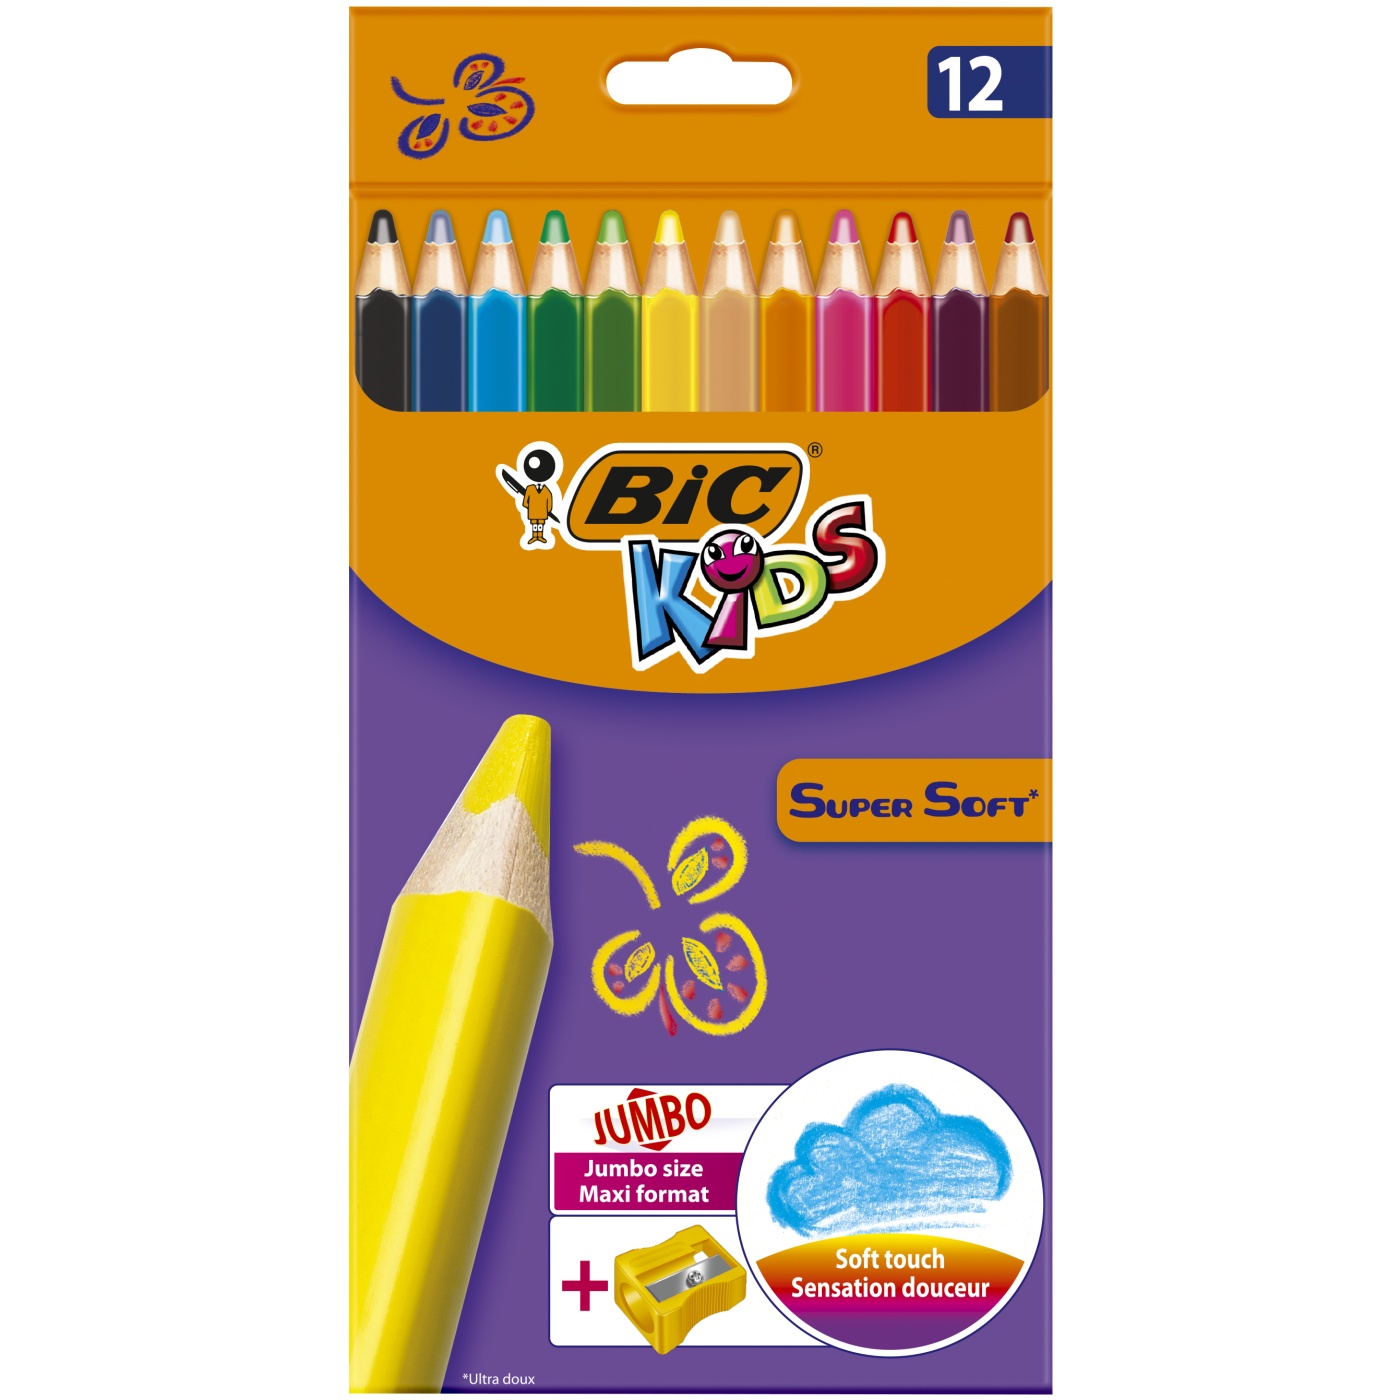 Details about   CBEEBIES CHILDREN’S JUMBO COLOURING PENCILS 10 PACK PLAY LEARN EARLY YEARS NEW 